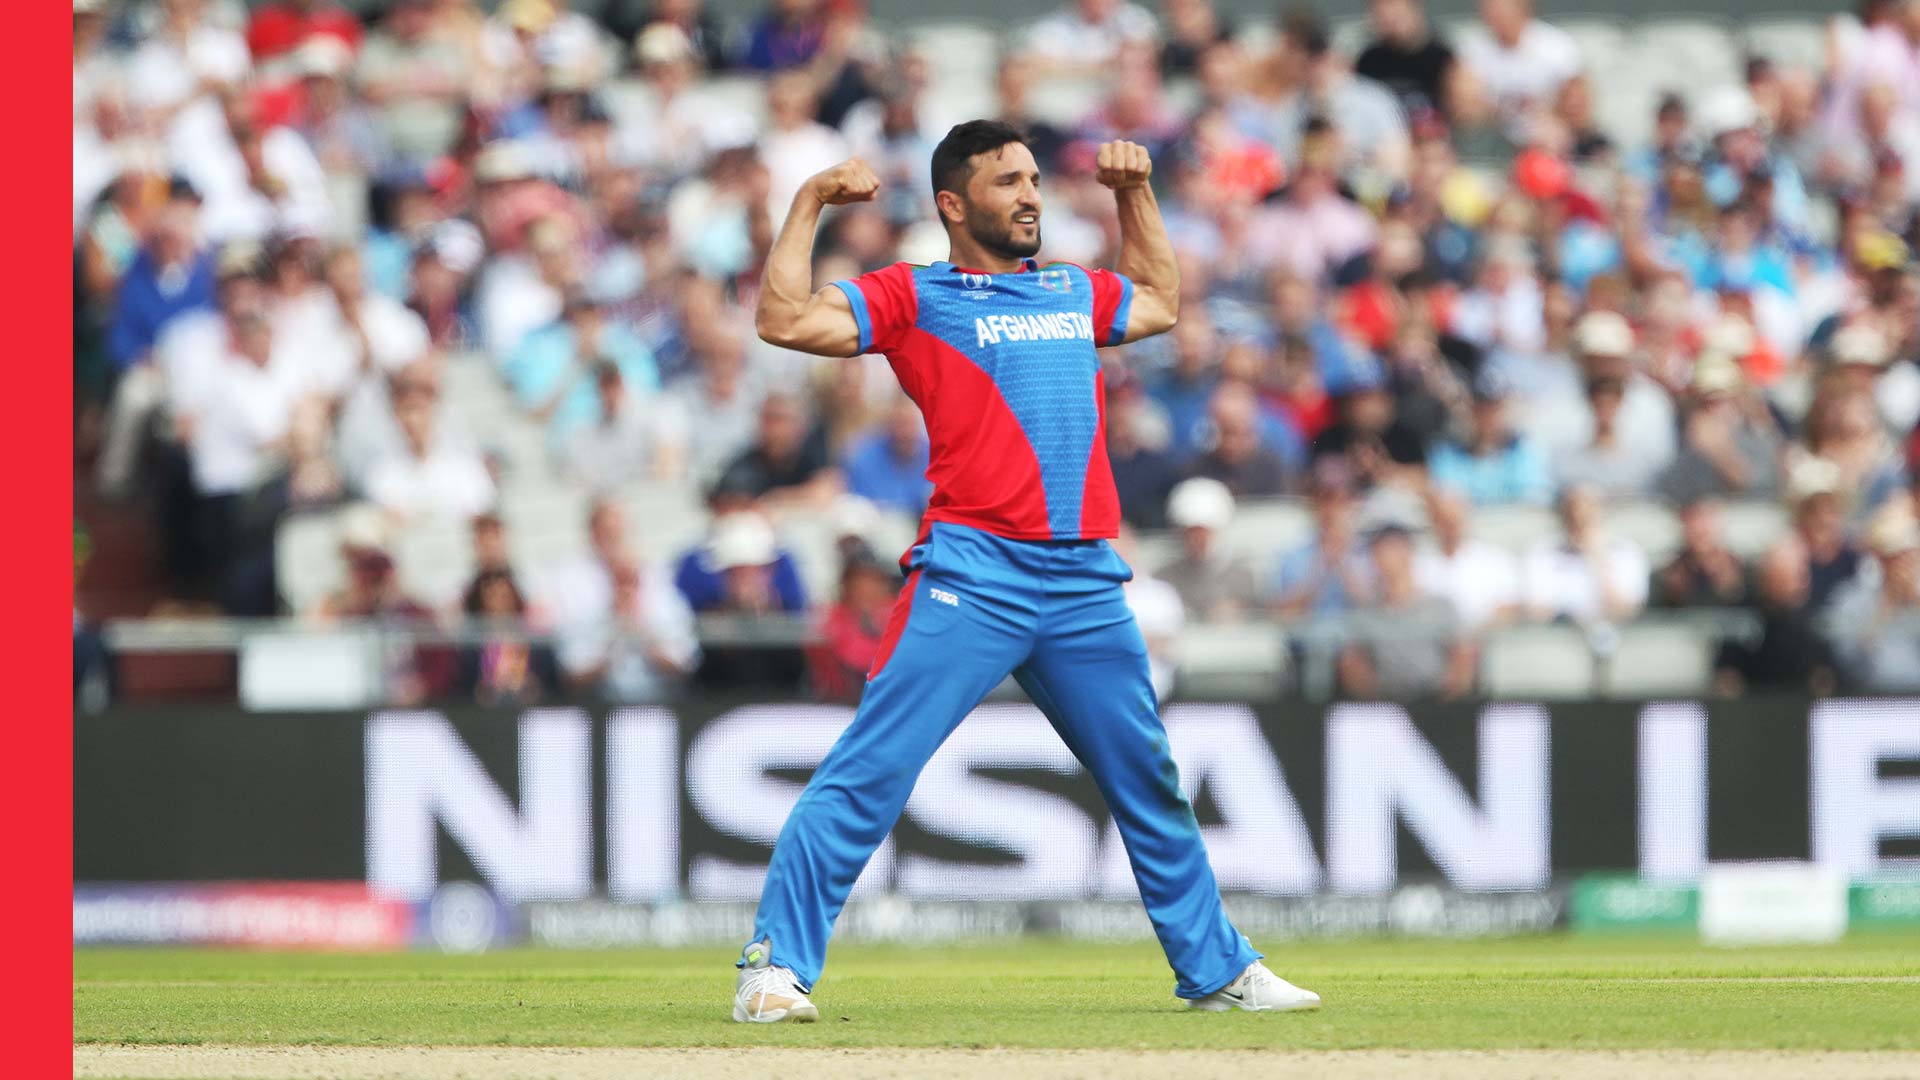 India vs Afghanistan Cricket Match World Cup 2019 Watch Online